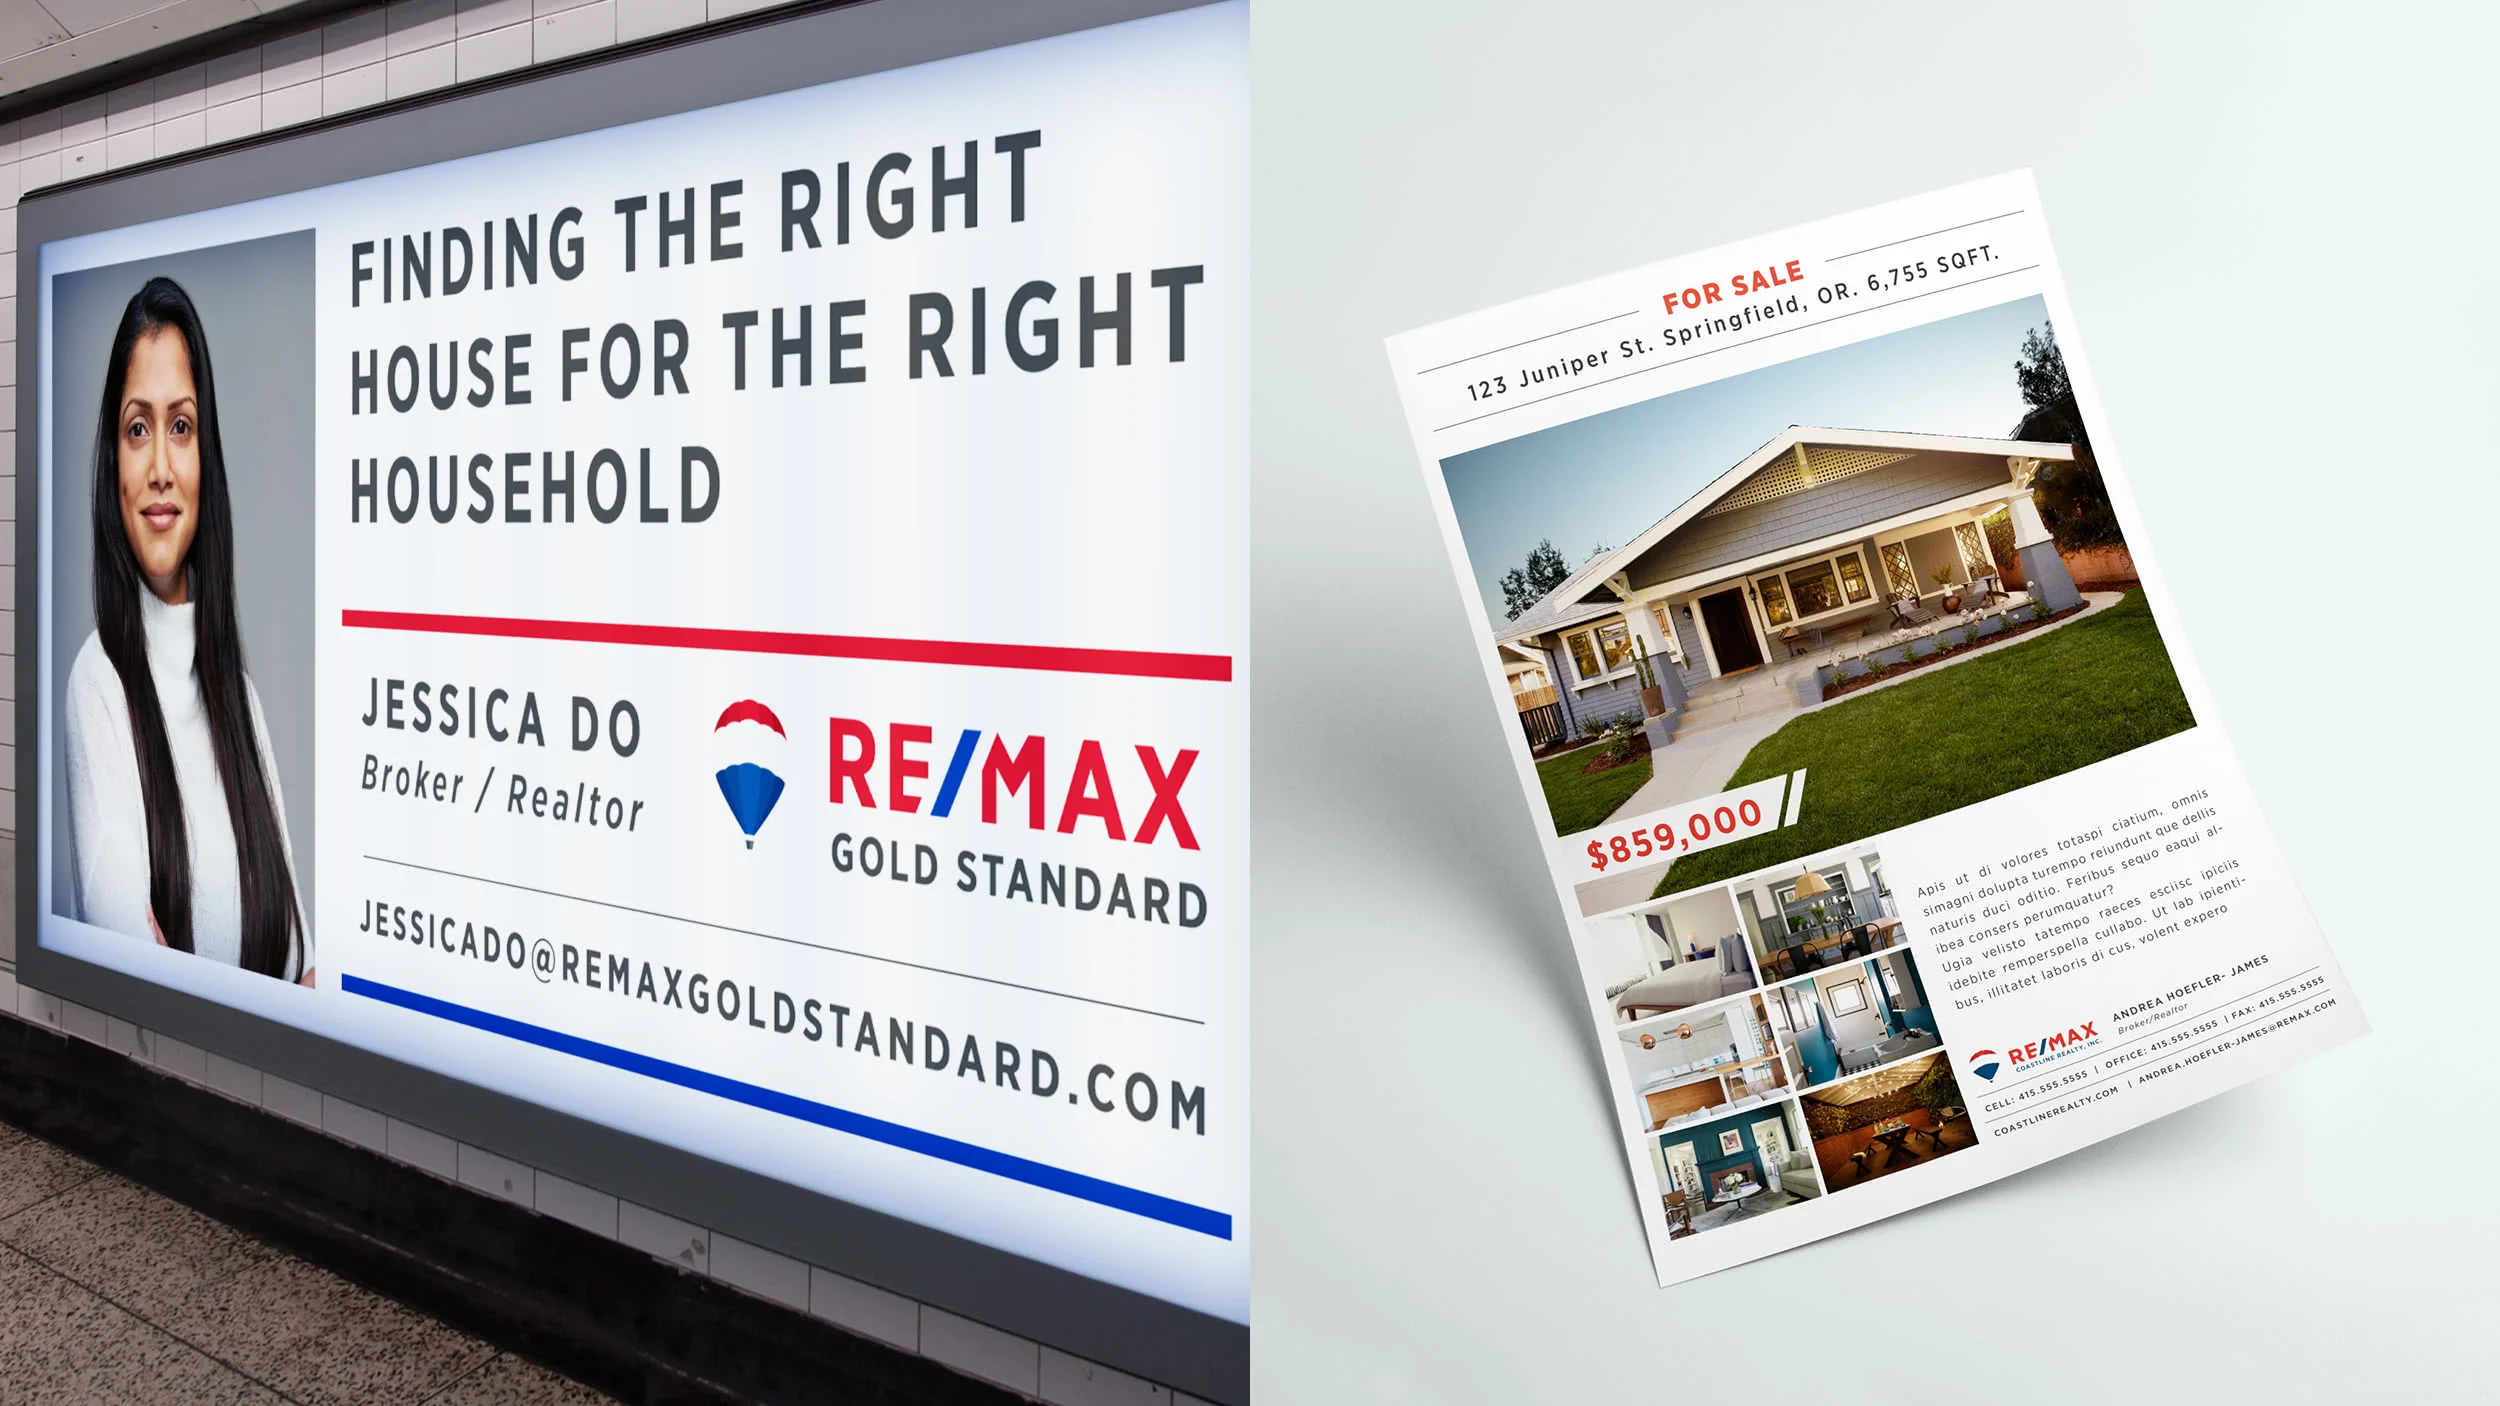 A RE/MAX agent subway ad and a RE/MAX "For Sale" flyer